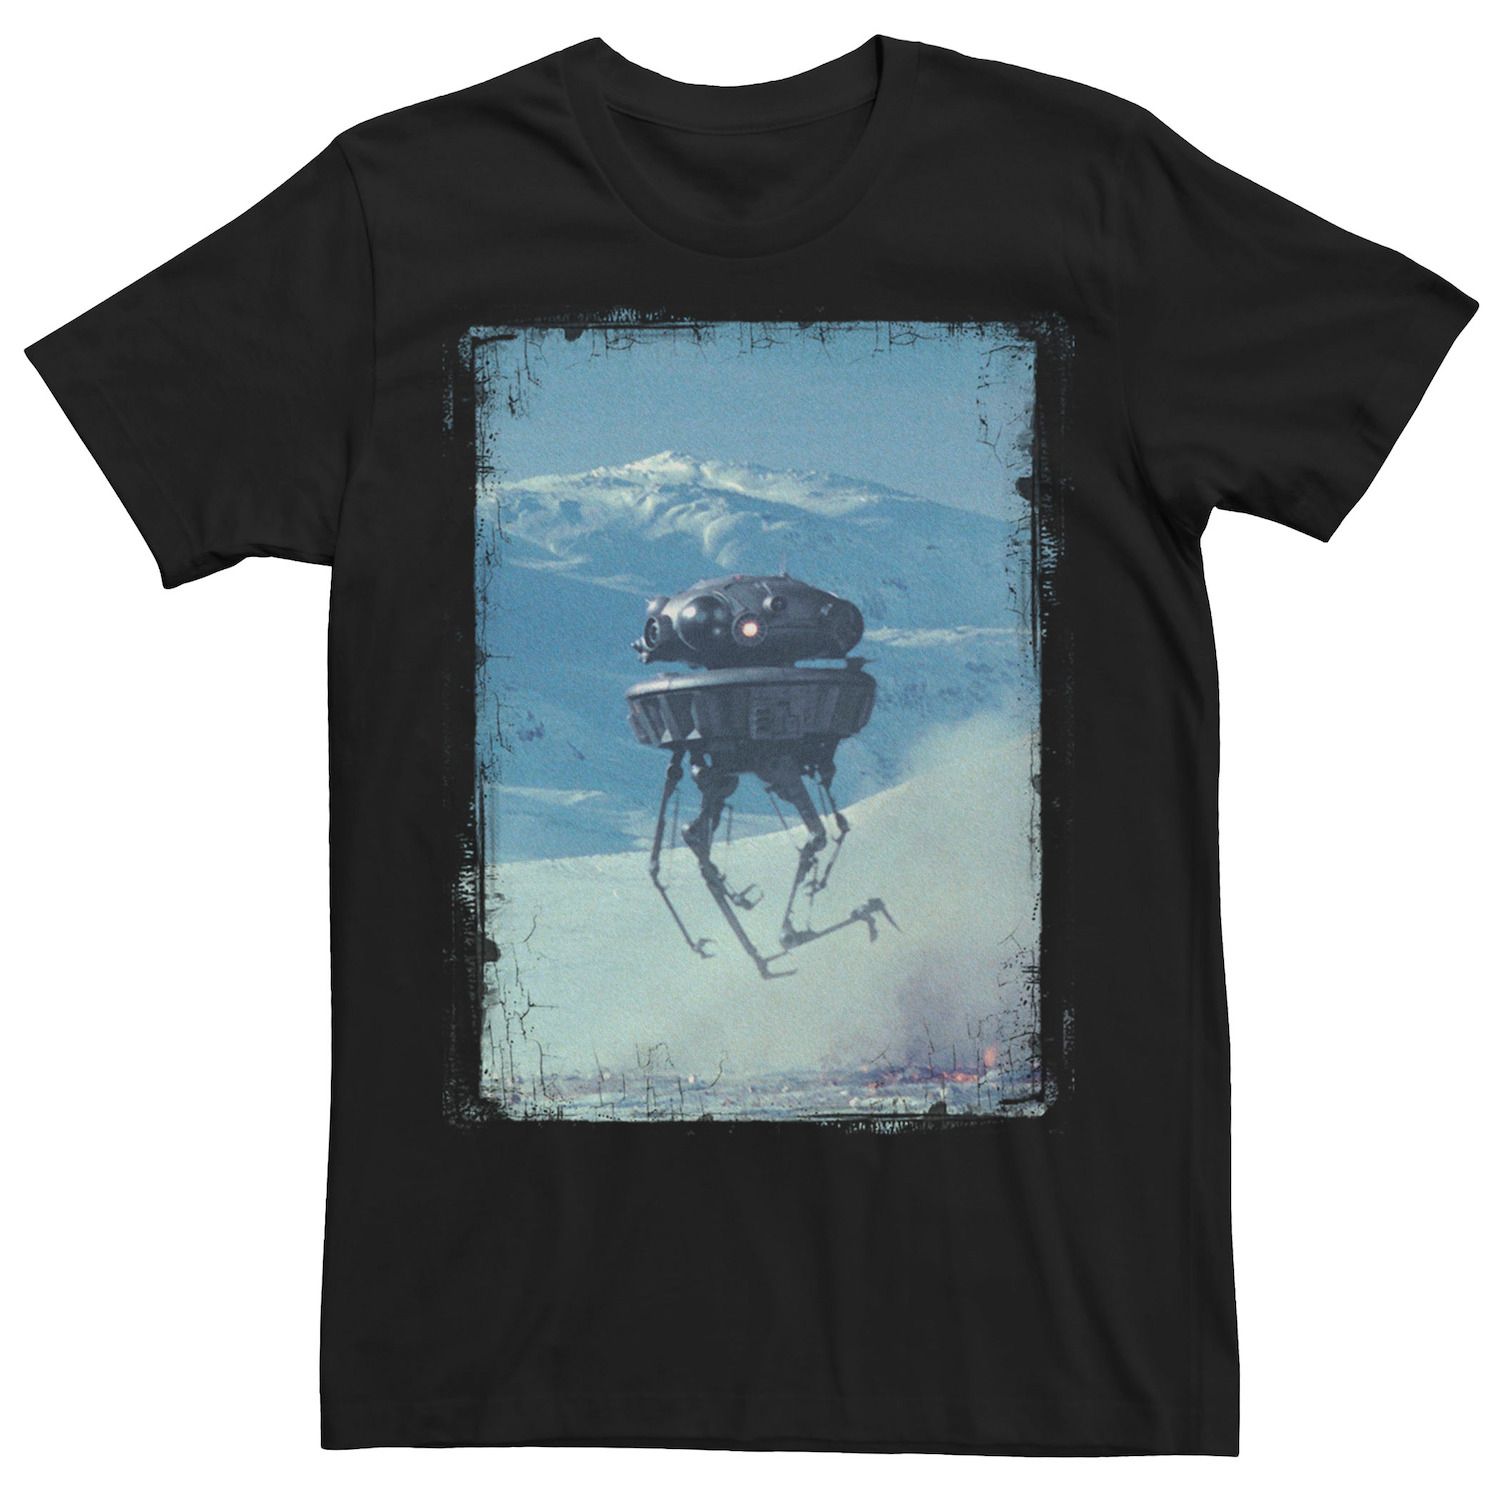 Image for Licensed Character Men's Star Wars Imperial Drone Graphic Tee at Kohl's.